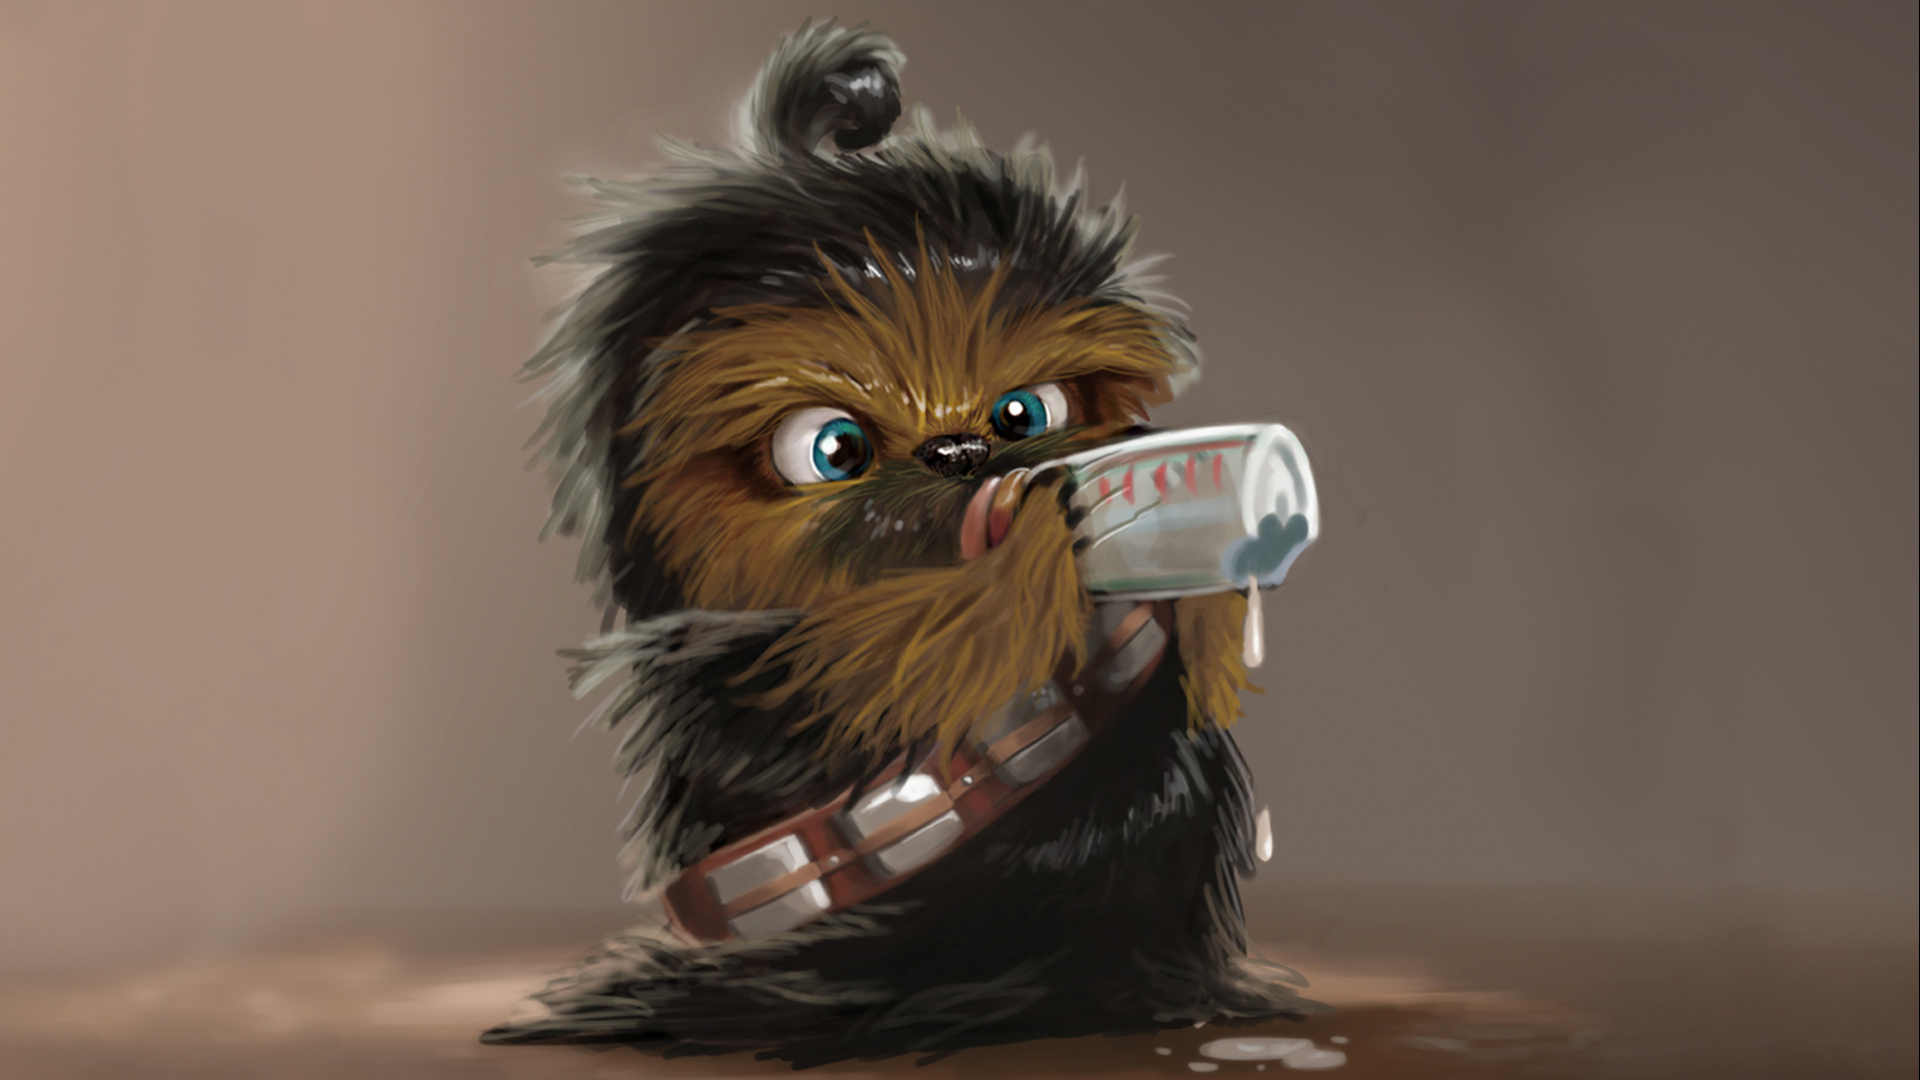 Small Wallpaper dump, Some Star Wars wallpaper I've collected over time. Chewbacca art, Star wars fan art, Star wars baby